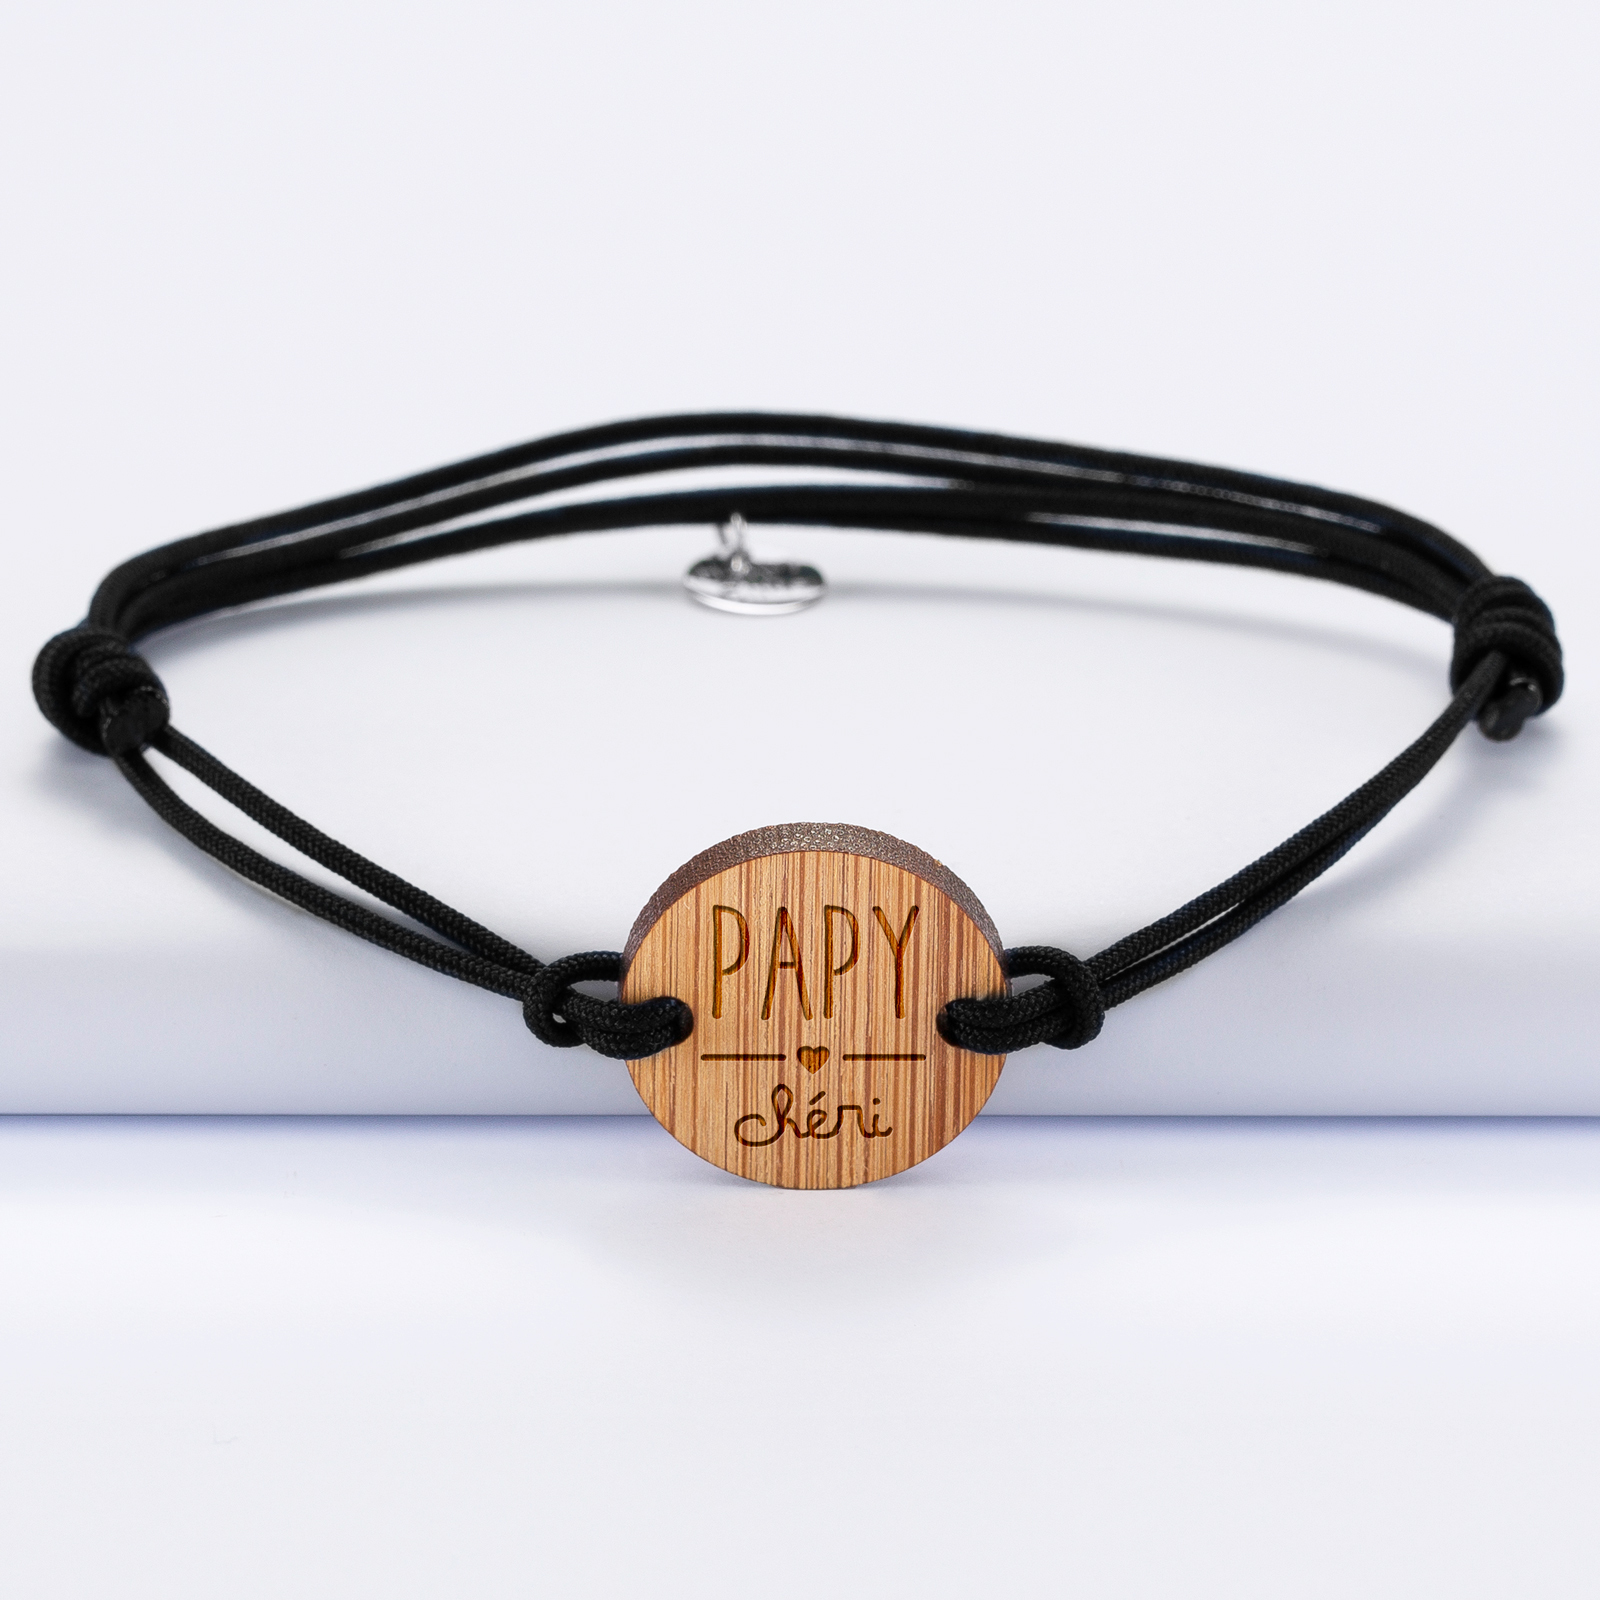 Men's personalised engraved round wooden medallion bracelet 21mm - special edition "Papy Chéri"